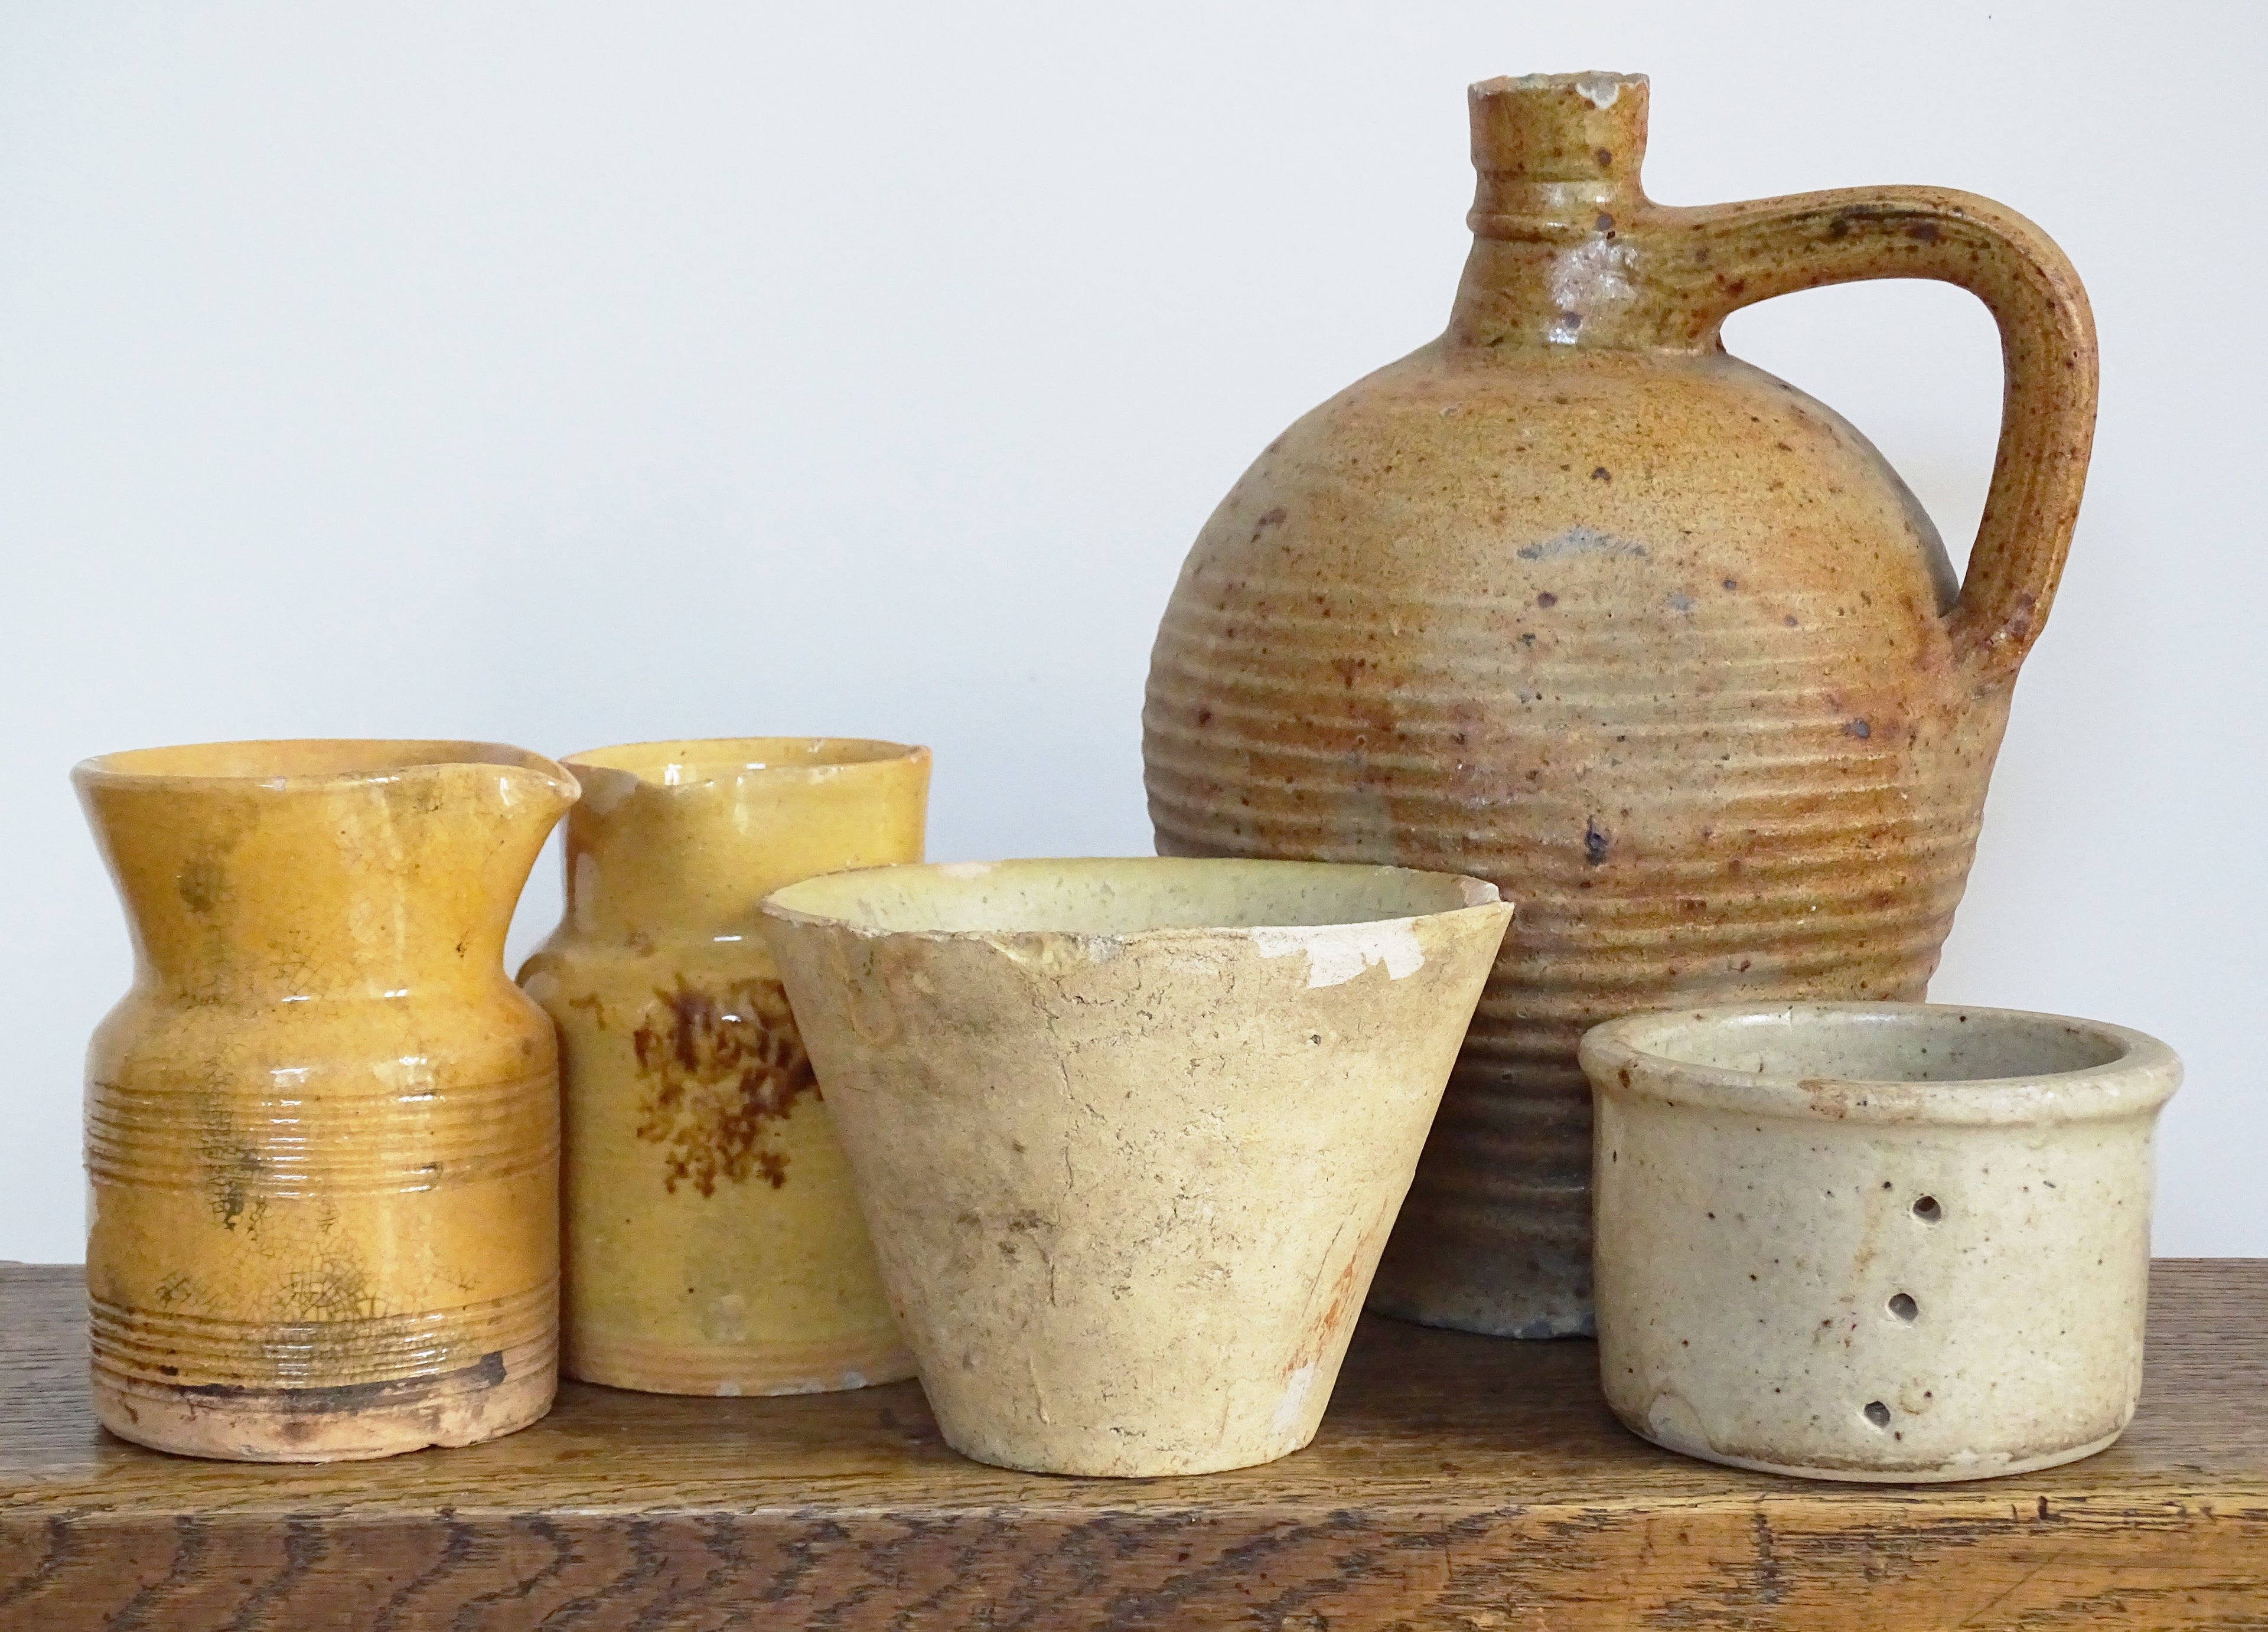 Antique French pottery collection, glazed yellow pottery jugs, earthenware bowls and pitchers. 